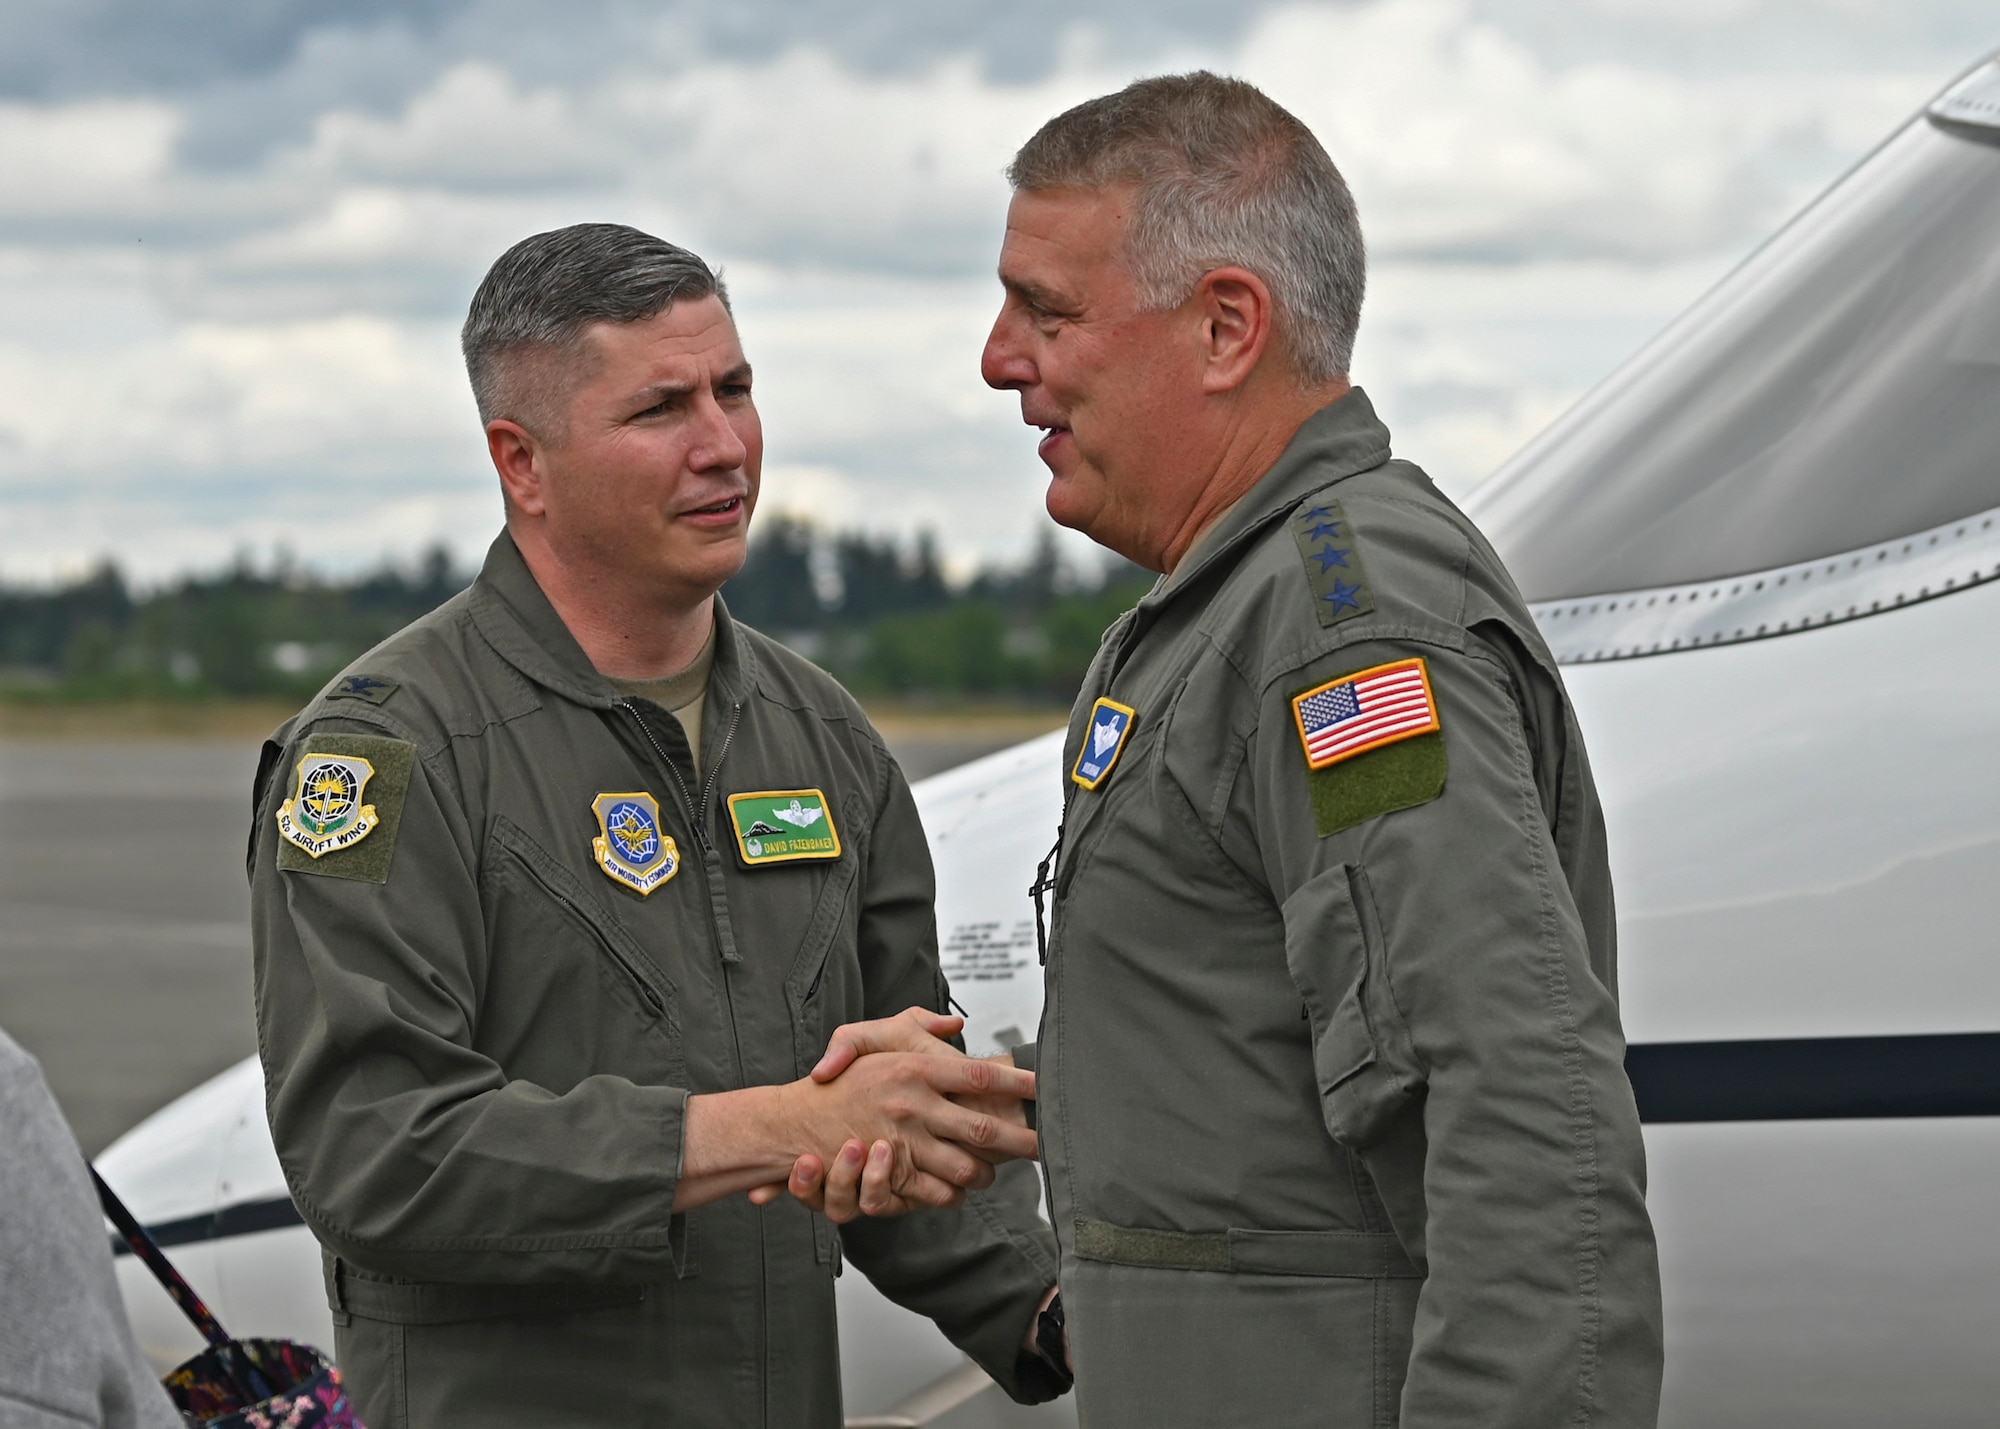 U.S. Air Force Col. David Fazenbaker, left, 62nd Airlift Wing commander, shakes hands with Gen. Mike Minihan, Air Mobility Command commander at Joint Base Lewis-McChord, Washington, July 6, 2022. Minihan and Chief Master Sgt. Brian Kruzelnick, AMC command chief, spent two days visiting Team McChord to experience the way America’s Airlift Wing executes rapid global mobility. (U.S. Air Force photo by Senior Airman Callie Norton)